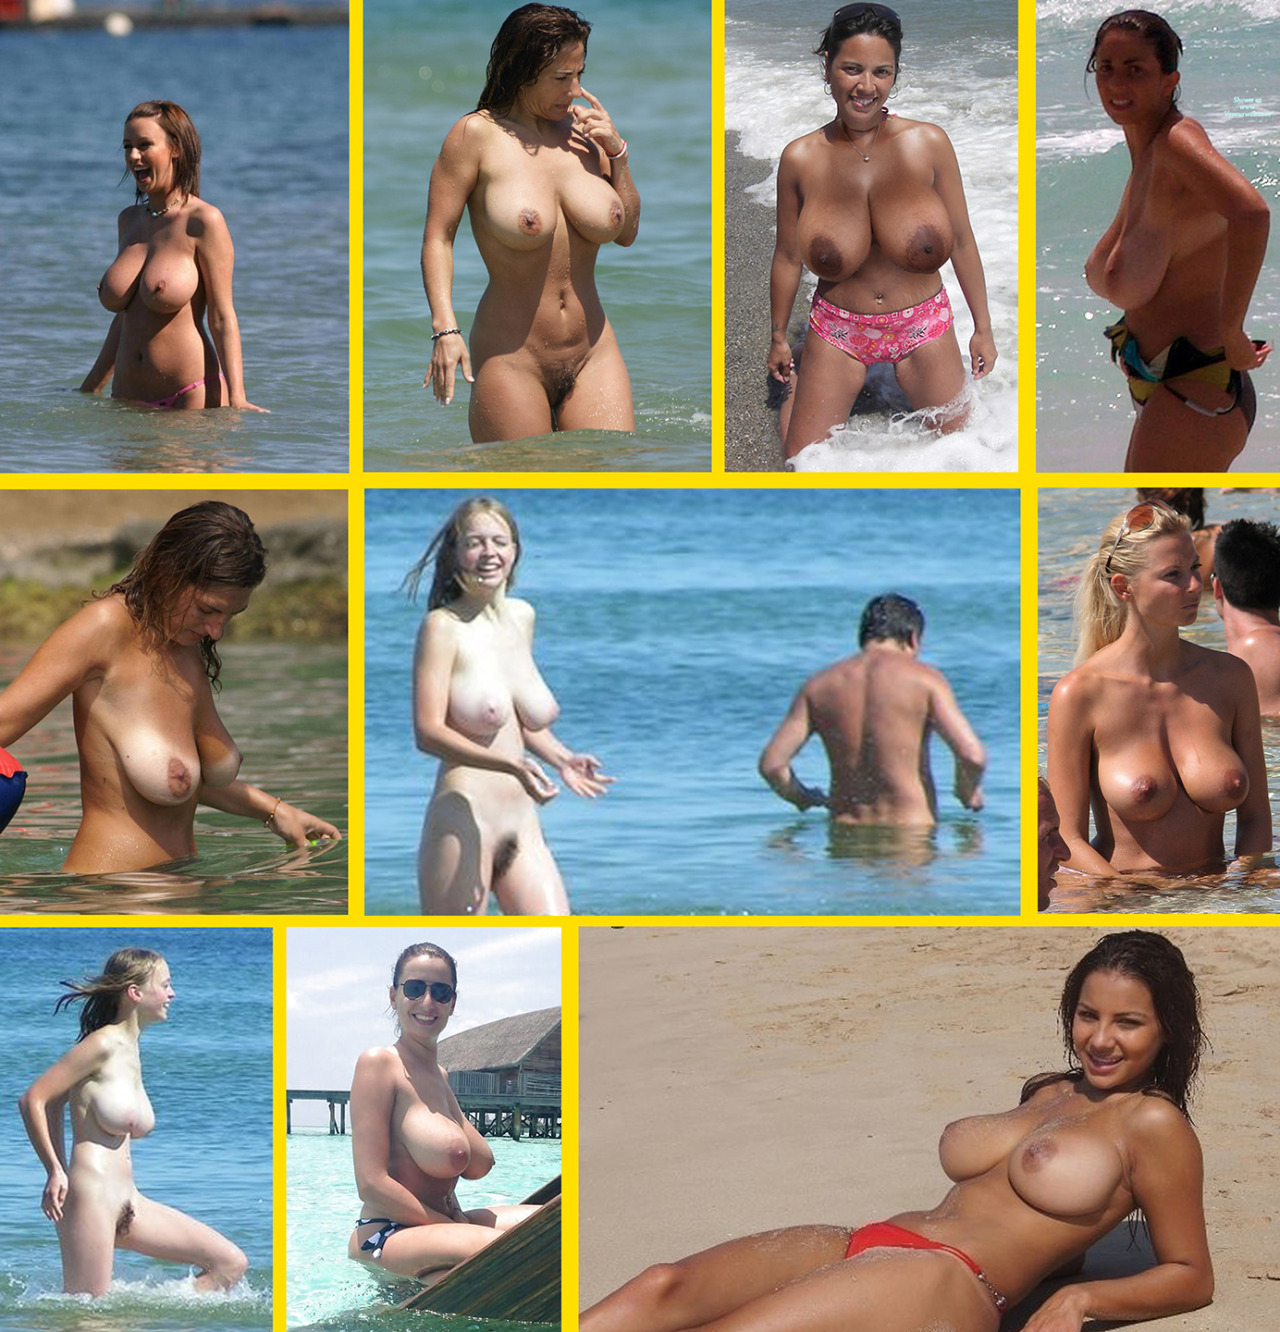 Nobreasttoobig - Some Damn Good Reasons To Head To The Beach picture 4 of 10